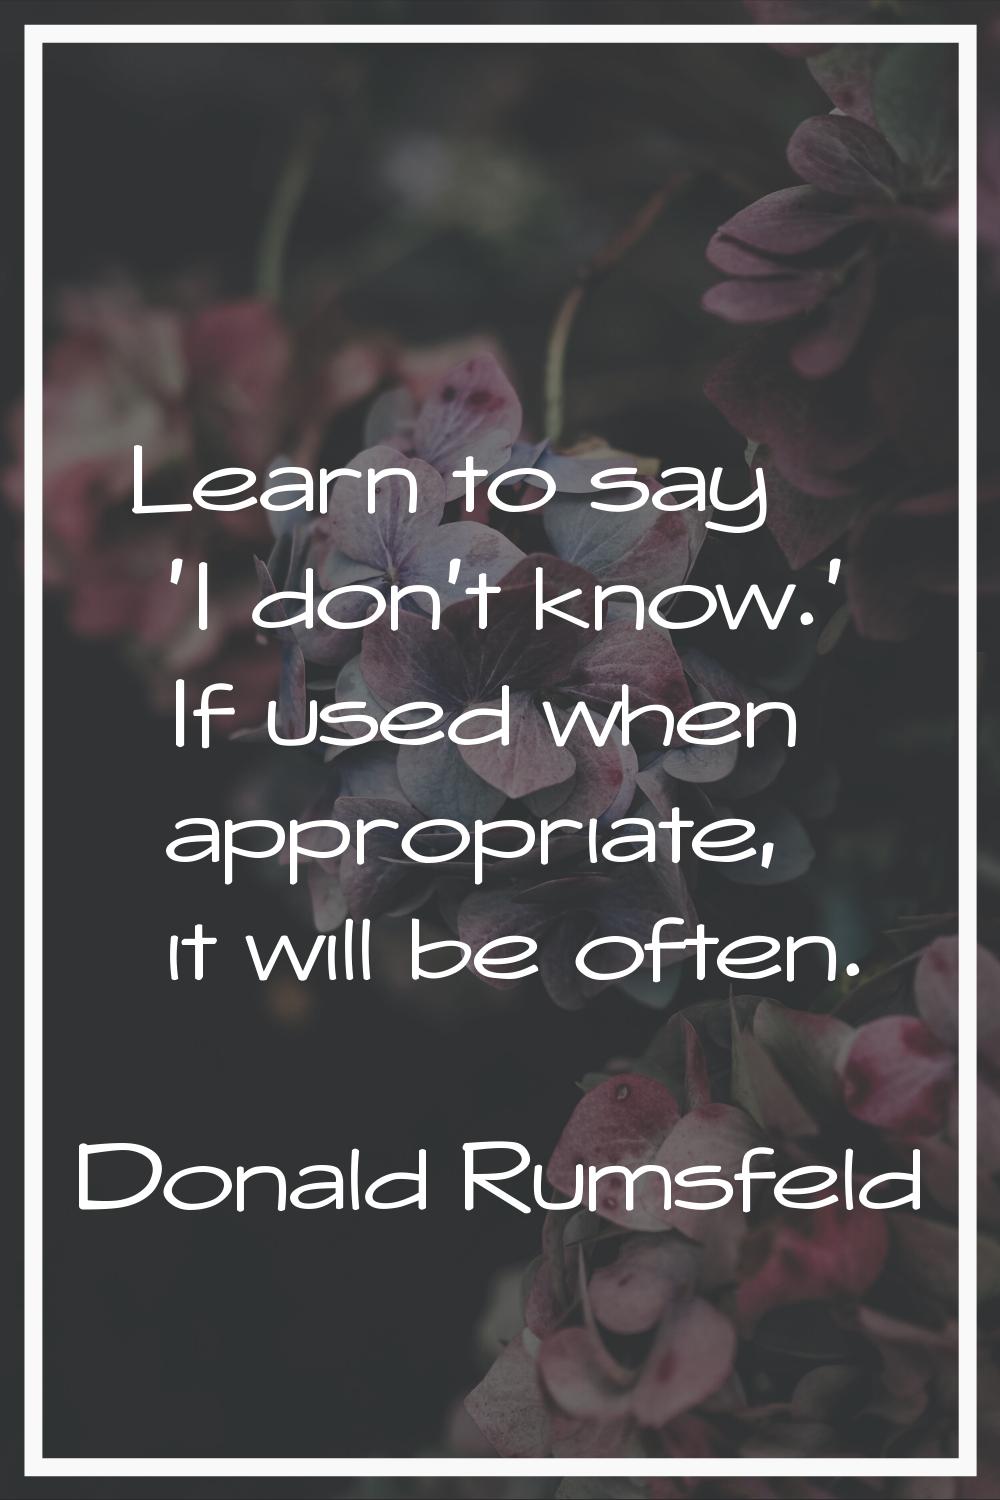 Learn to say 'I don't know.' If used when appropriate, it will be often.